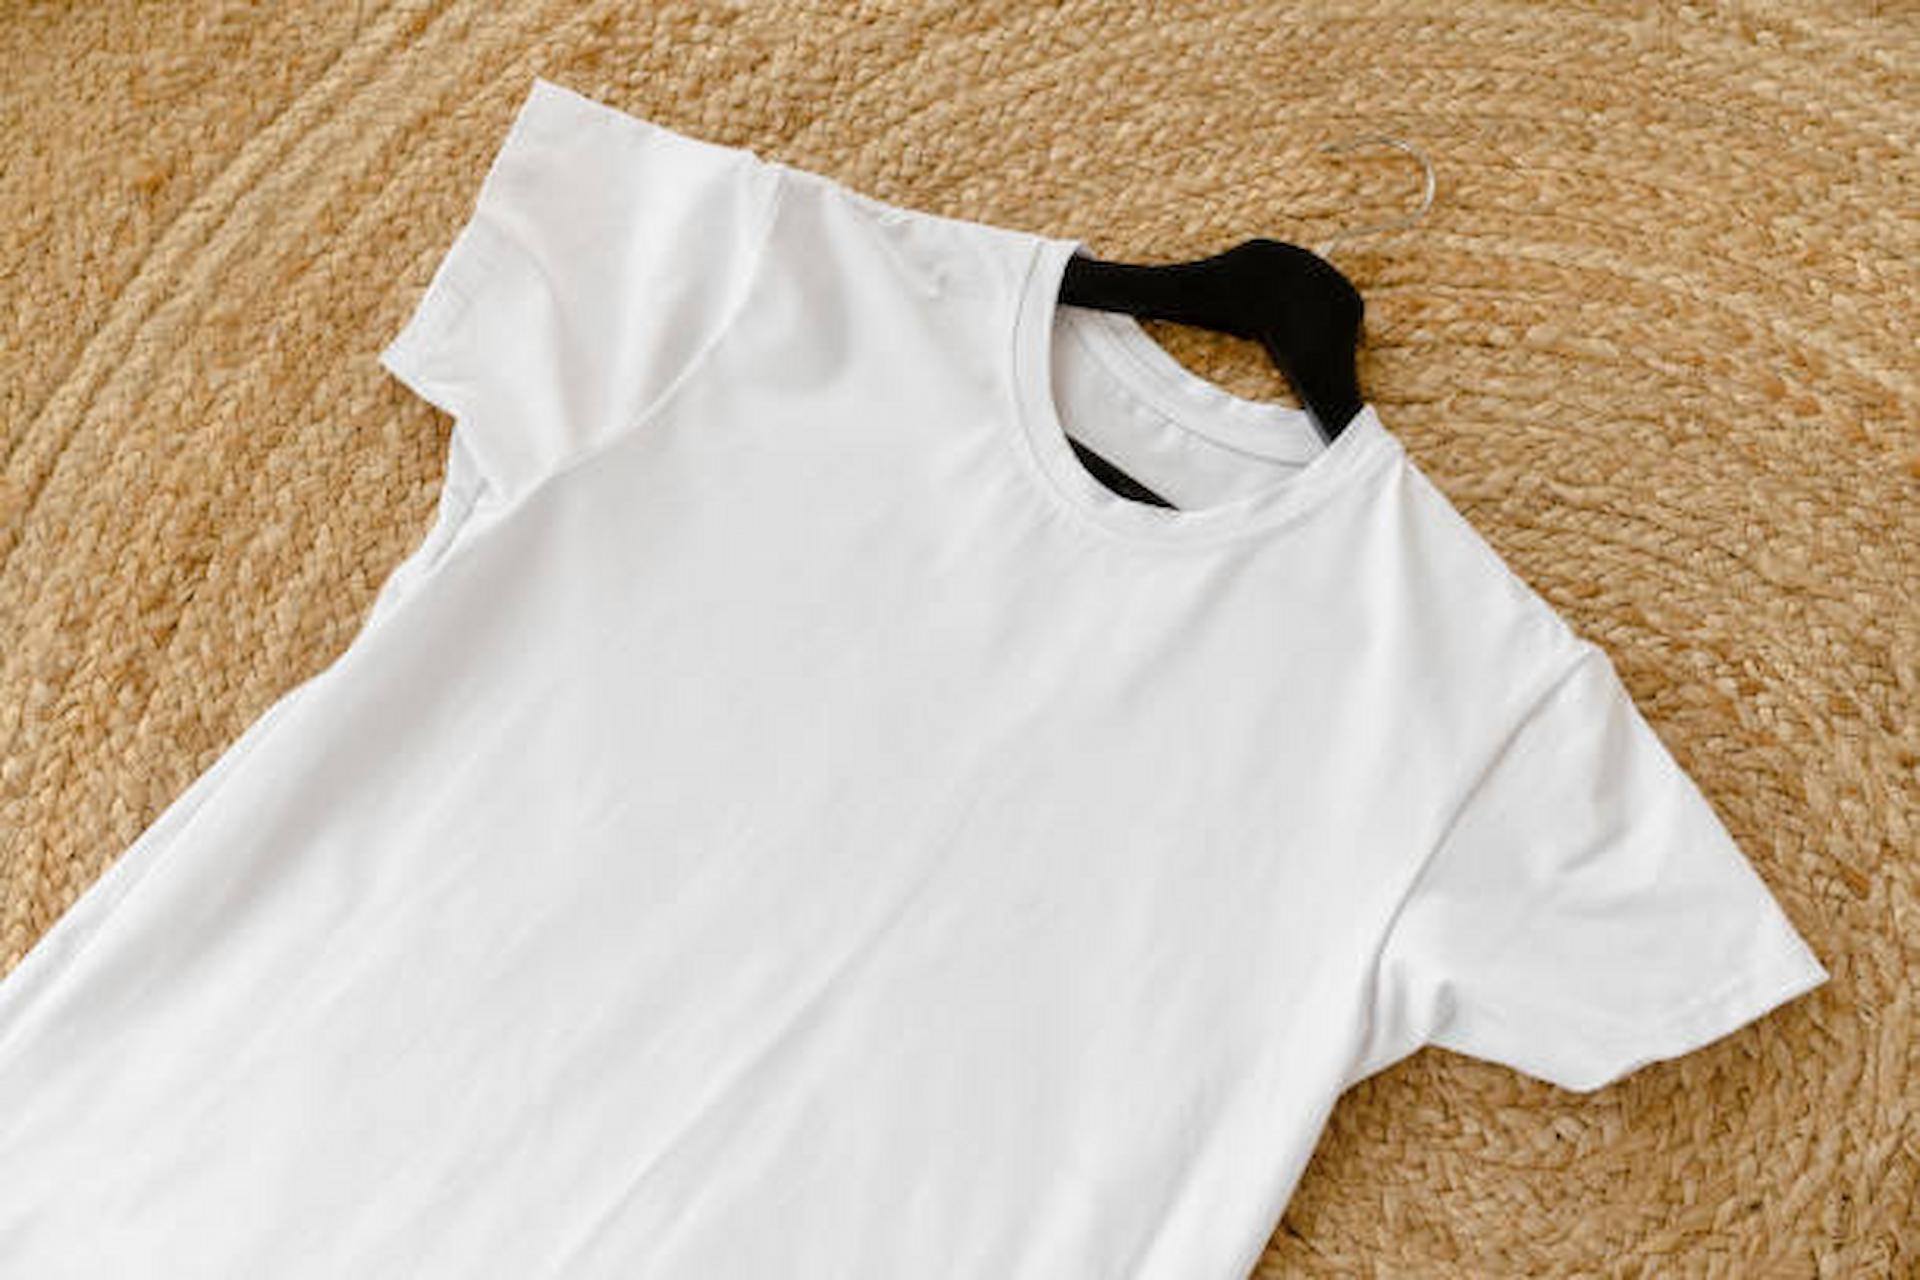 Plain white t-shirts are the perfect garment for all occasions